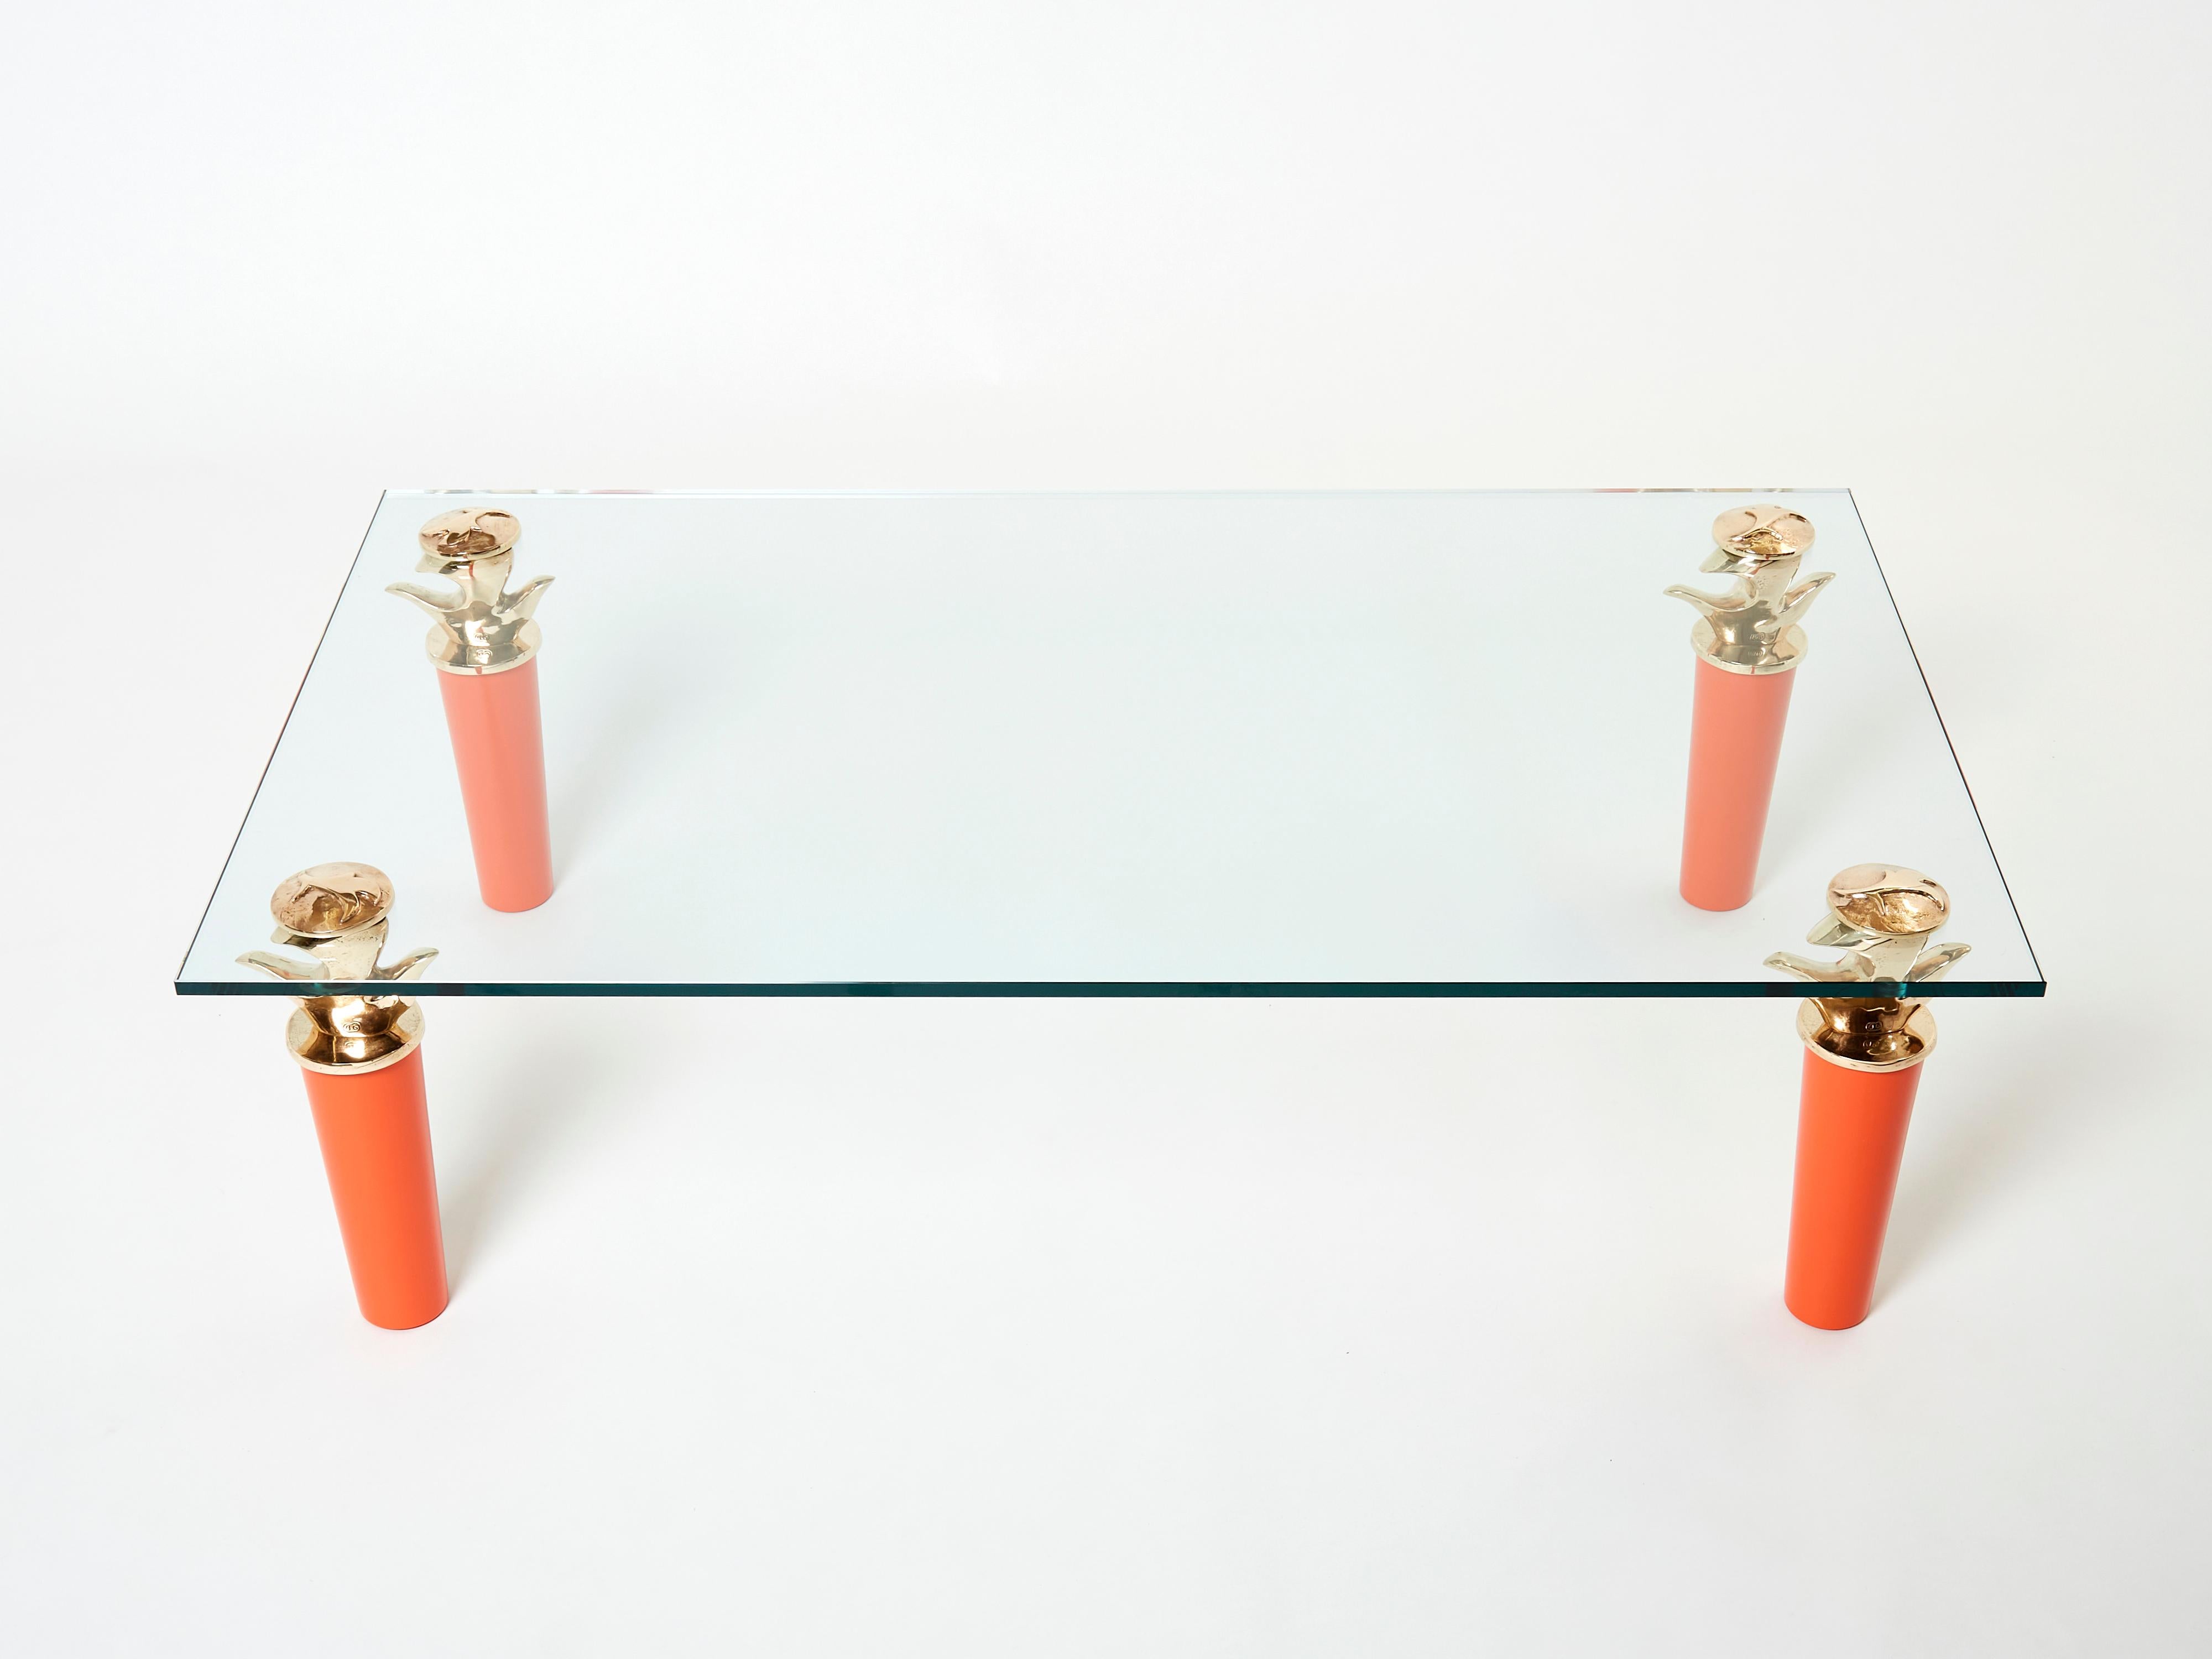 Late 20th Century Orange Lacquered and Bronze Glass Coffee Table by Garouste & Bonetti 1995 For Sale